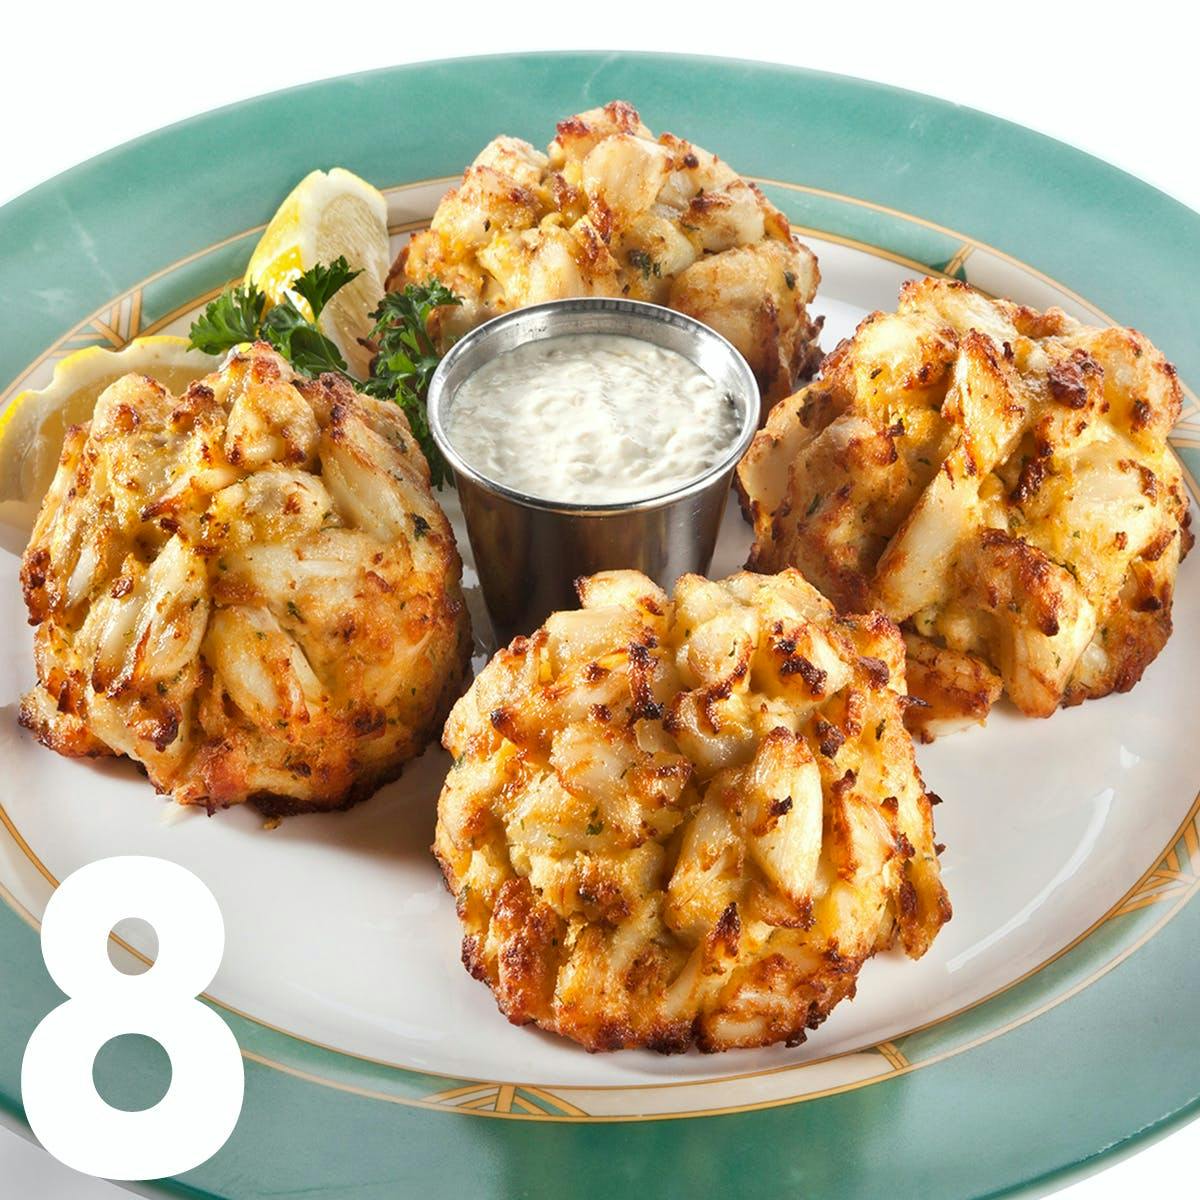 Jumbo Lump Crab Cakes with dilled tartar sauce - Picture of Truluck's  Ocean's Finest Seafood & Crab, San Diego - Tripadvisor